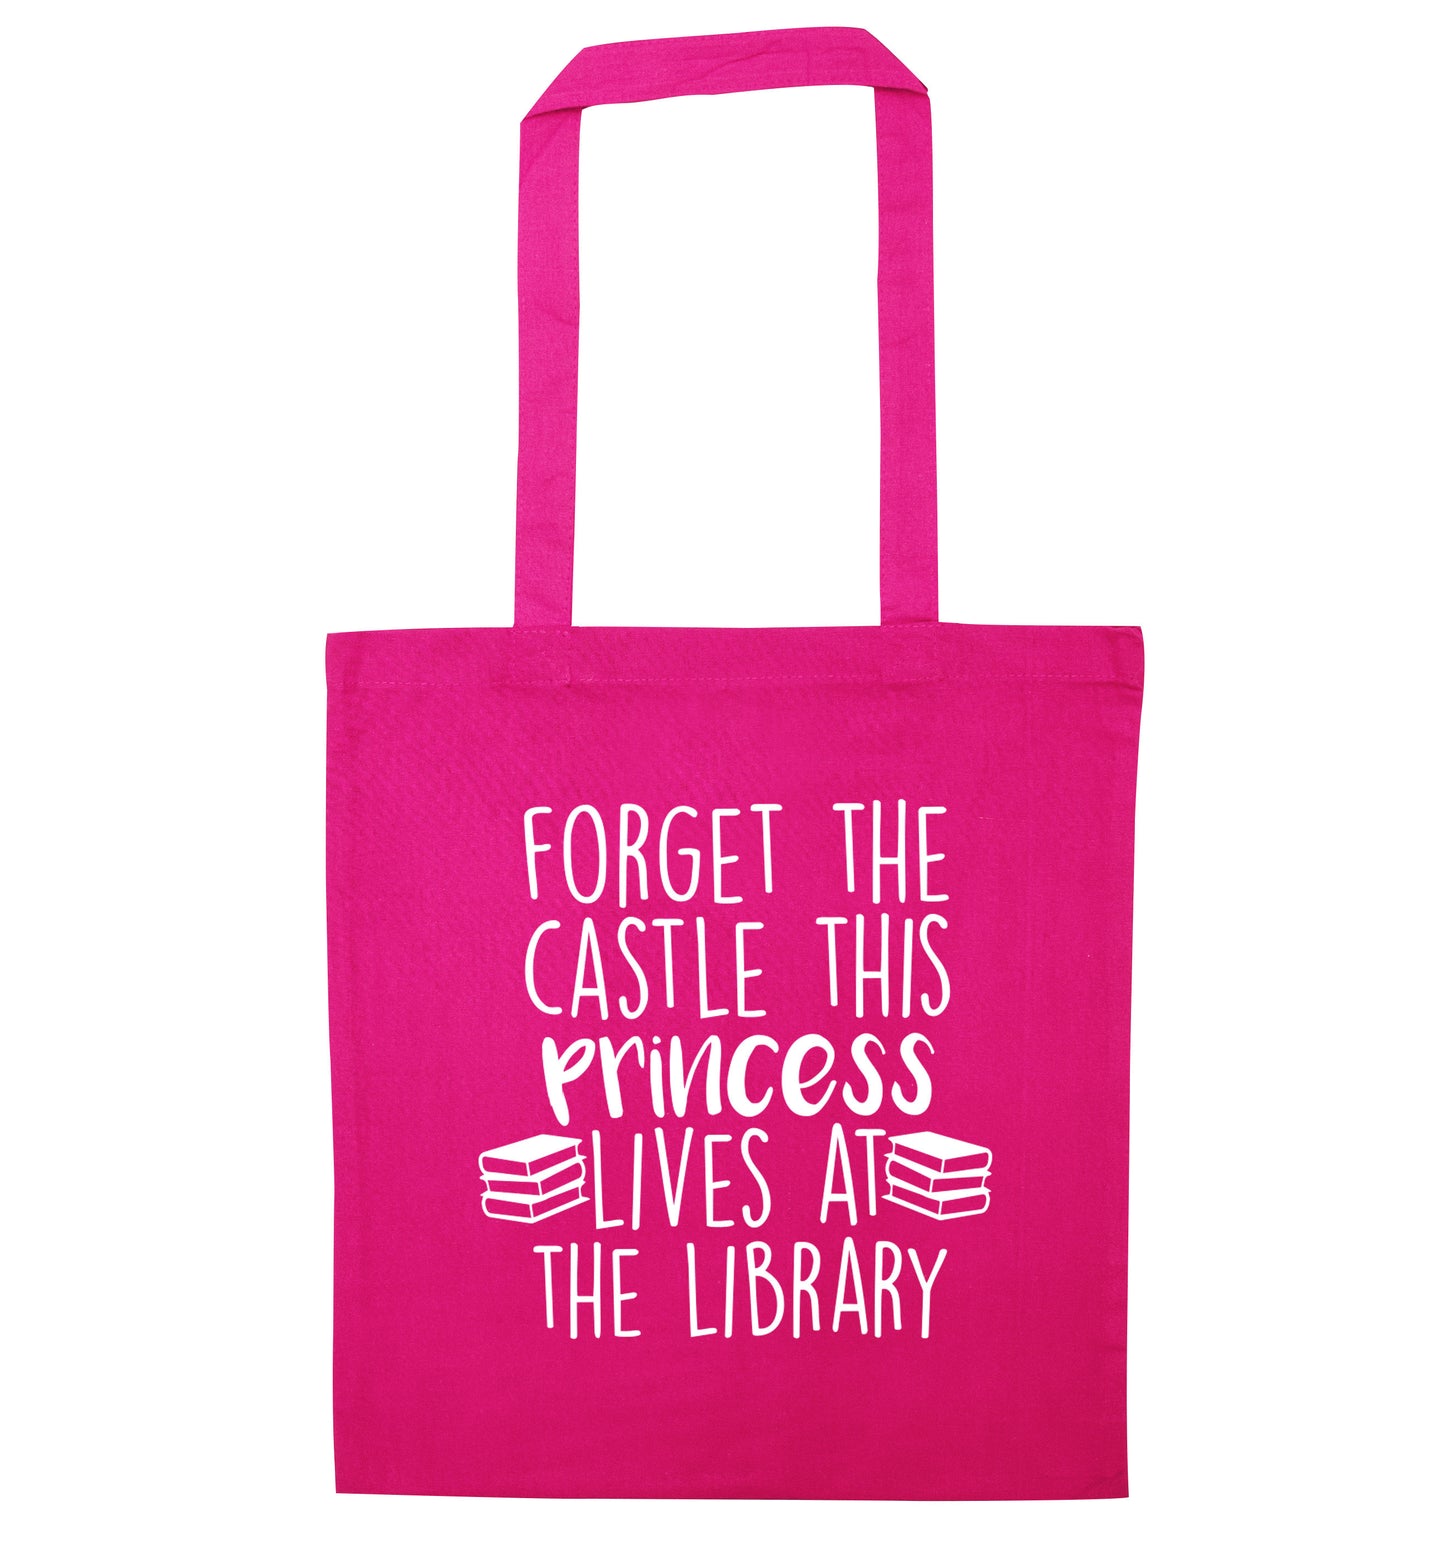 Forget the castle this princess lives at the library pink tote bag